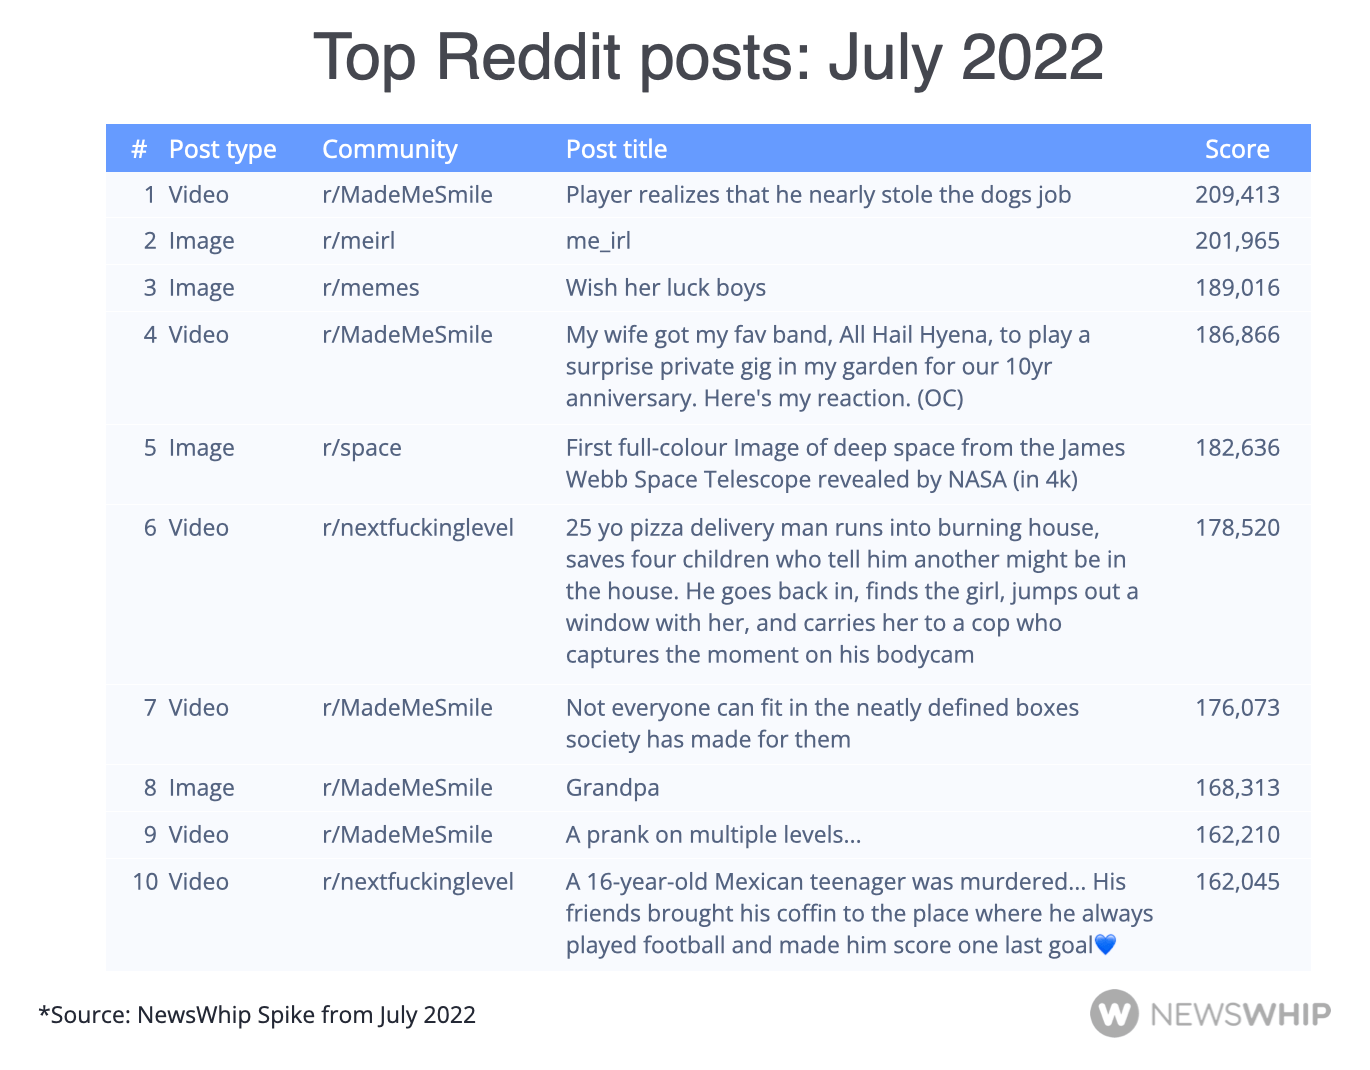 Table showing the top Reddit posts in July 2022, ranked by score